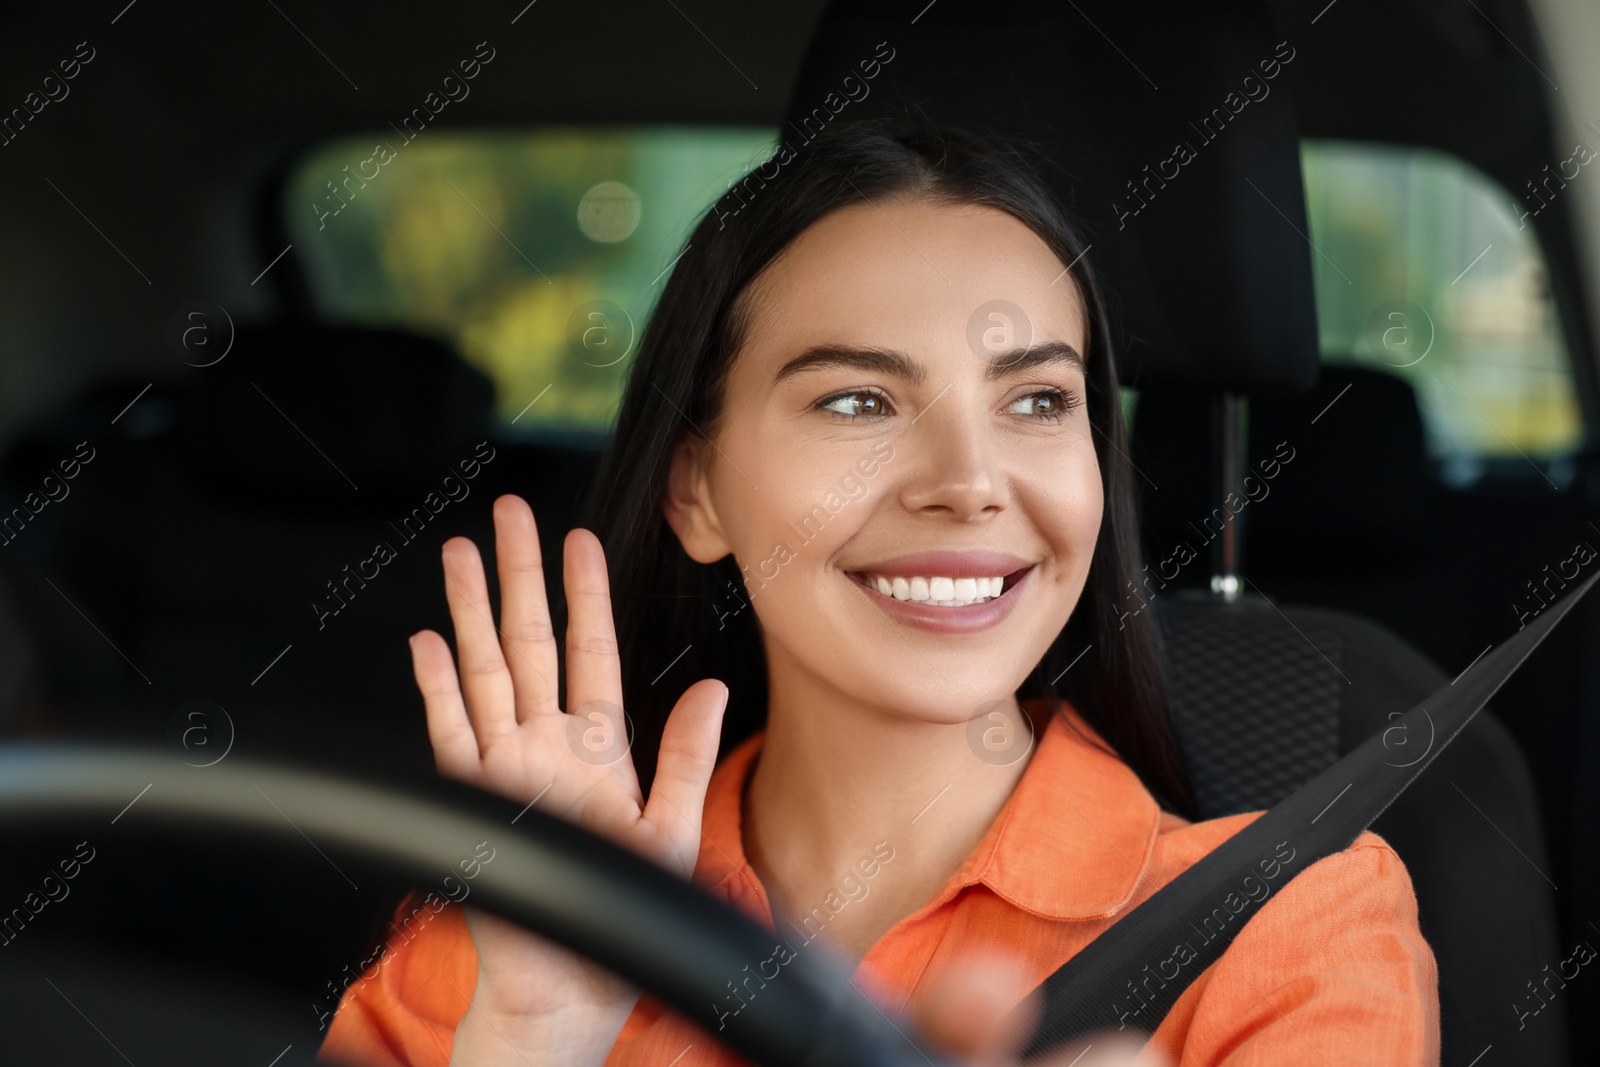 Photo of Enjoying trip. Happy young woman driving her car, view through windshield